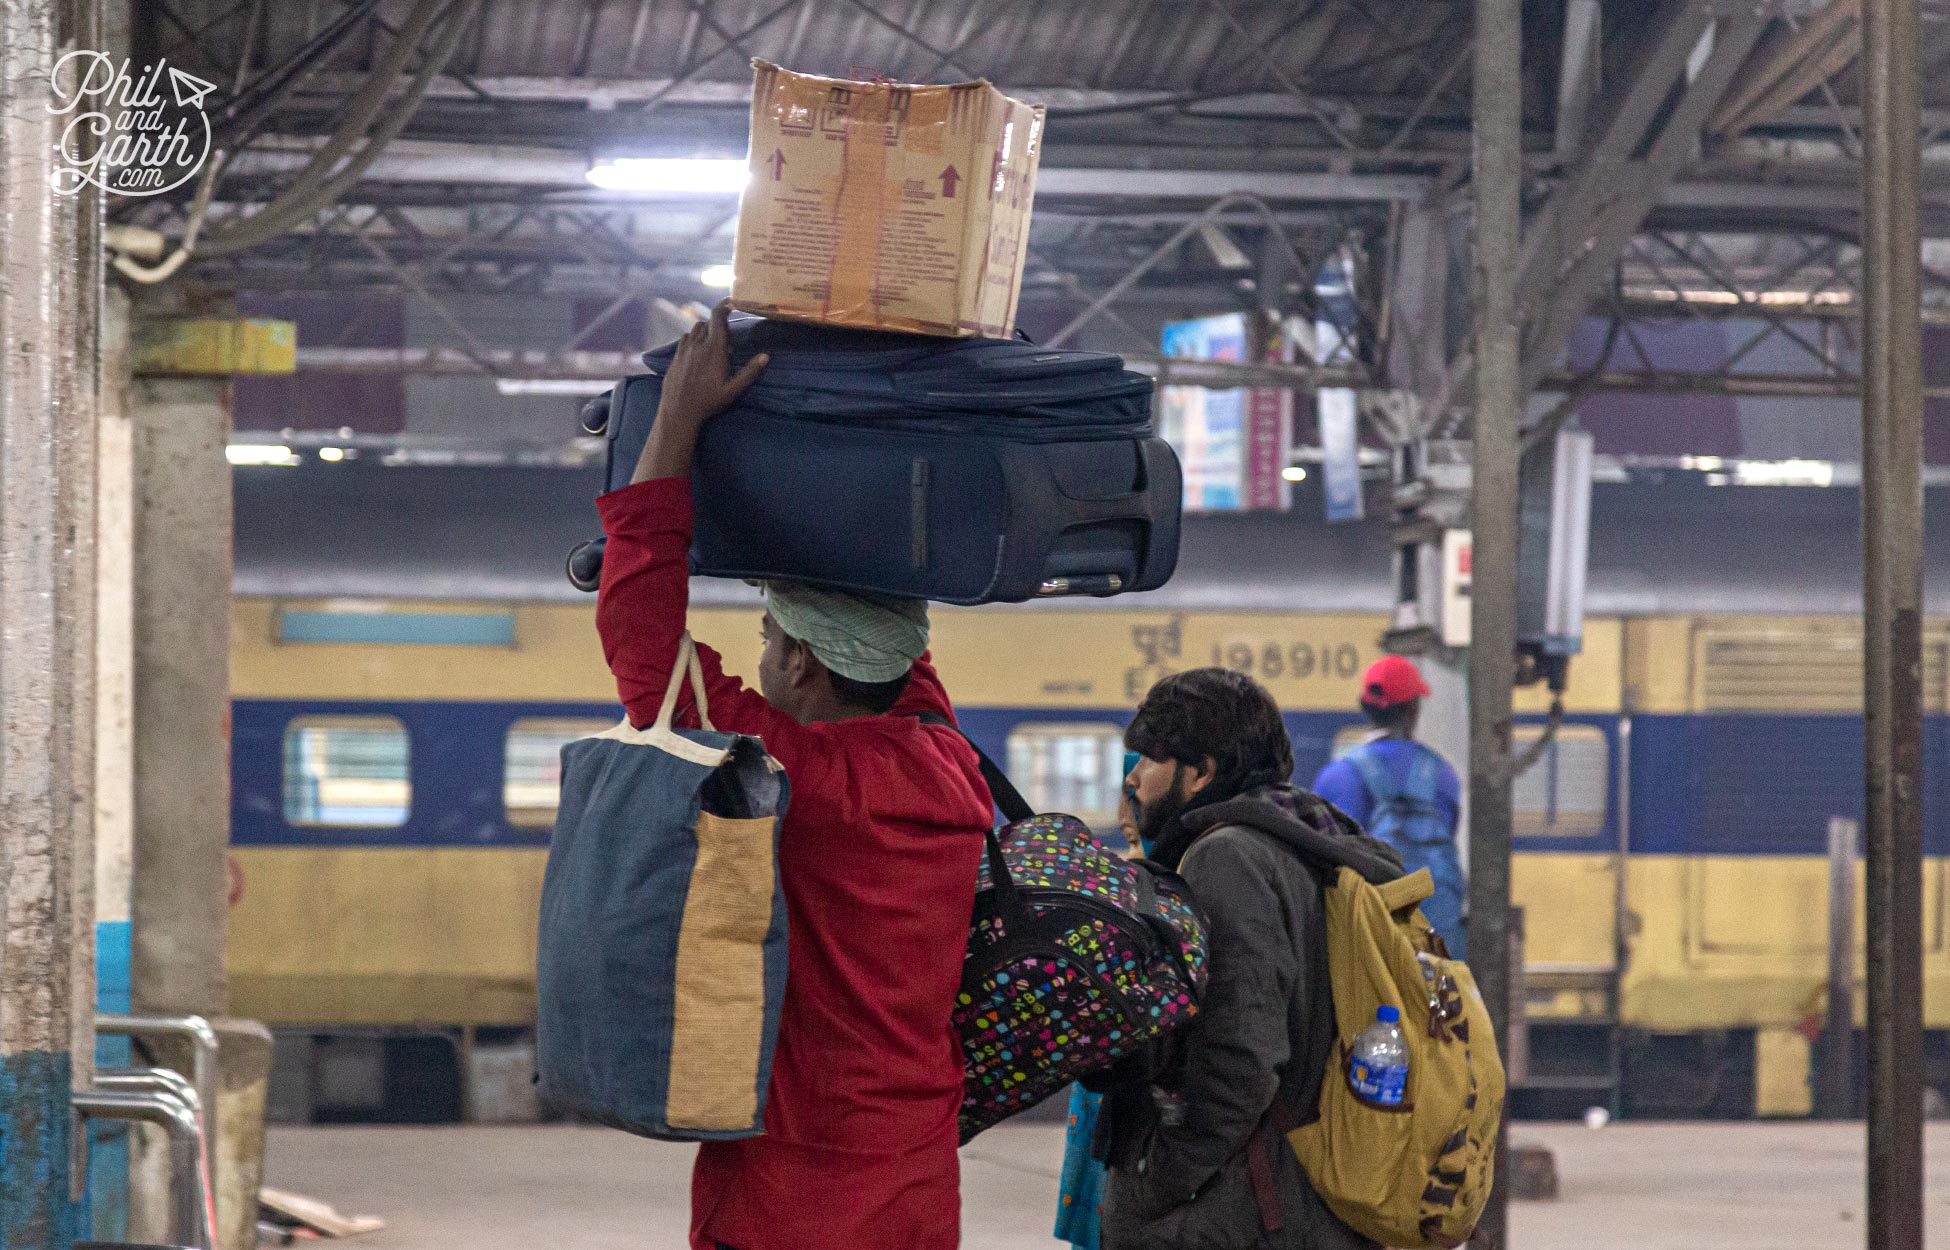 Luggage porters wear red blazers and carry huge loads, even on their heads